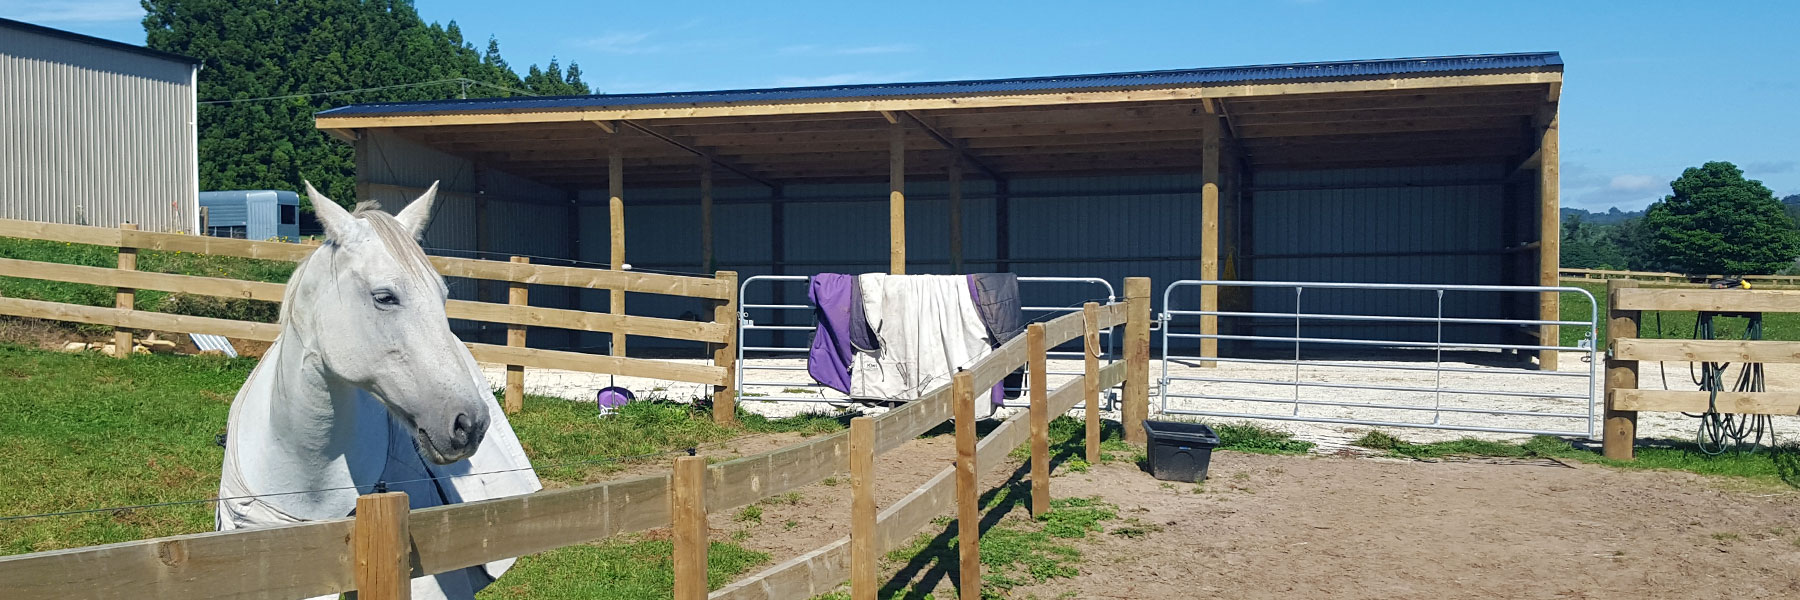 Horse Shelters, Stables & Tack Rooms